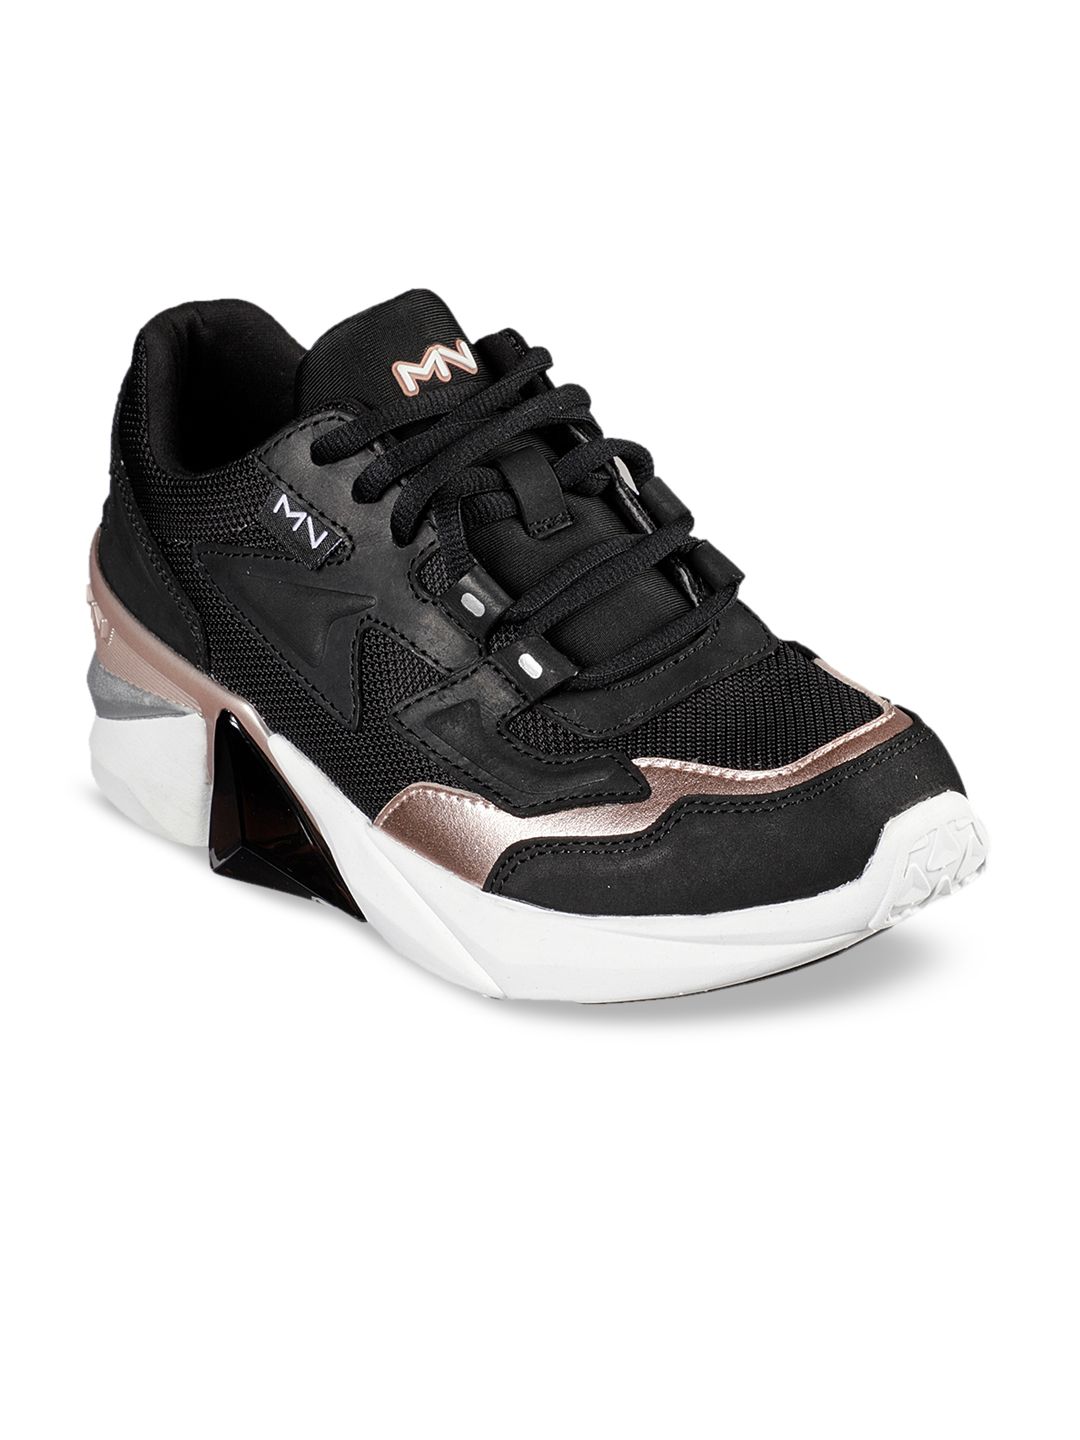 Skechers Women Black Colorblocked Sneakers Casual Shoes Price in India